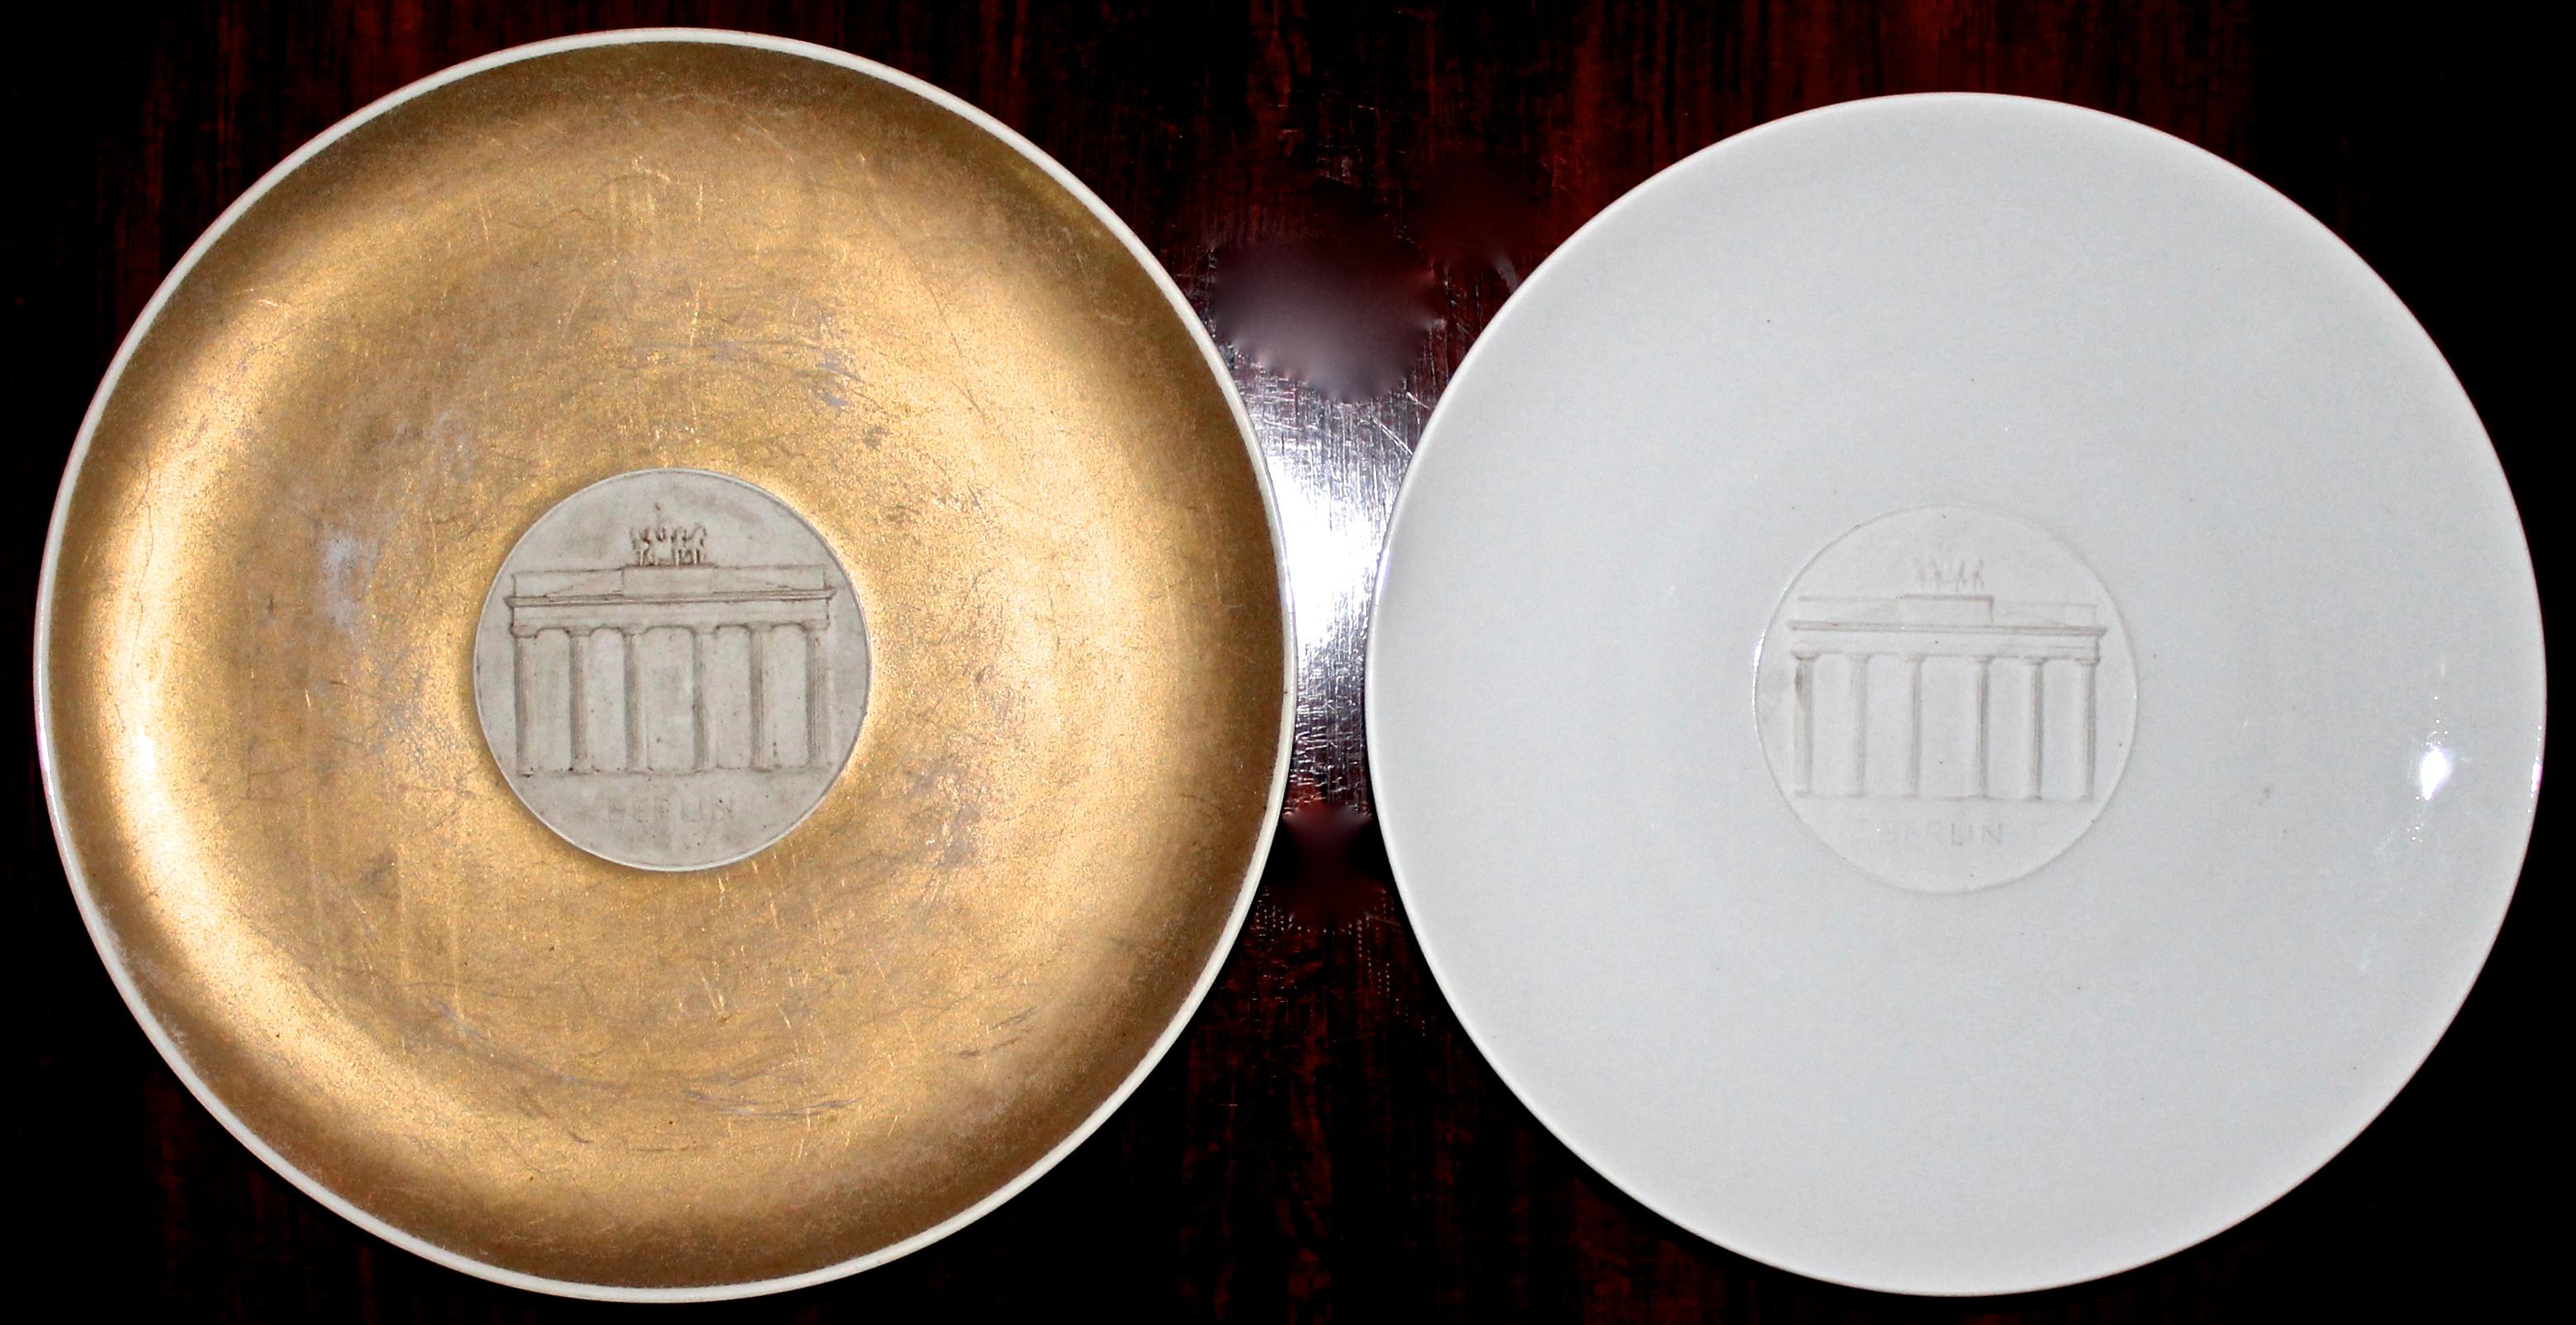 Rare period plates issued by KPM Porcelain in celebration of the infamous Nazi Olympics in 1936. Fully signed on bottom. Gold plate is slightly larger: 26.5cm x 2.5cm. The white plate is 4.8cm x 3cm. Both have holes on the back for wall hanging.